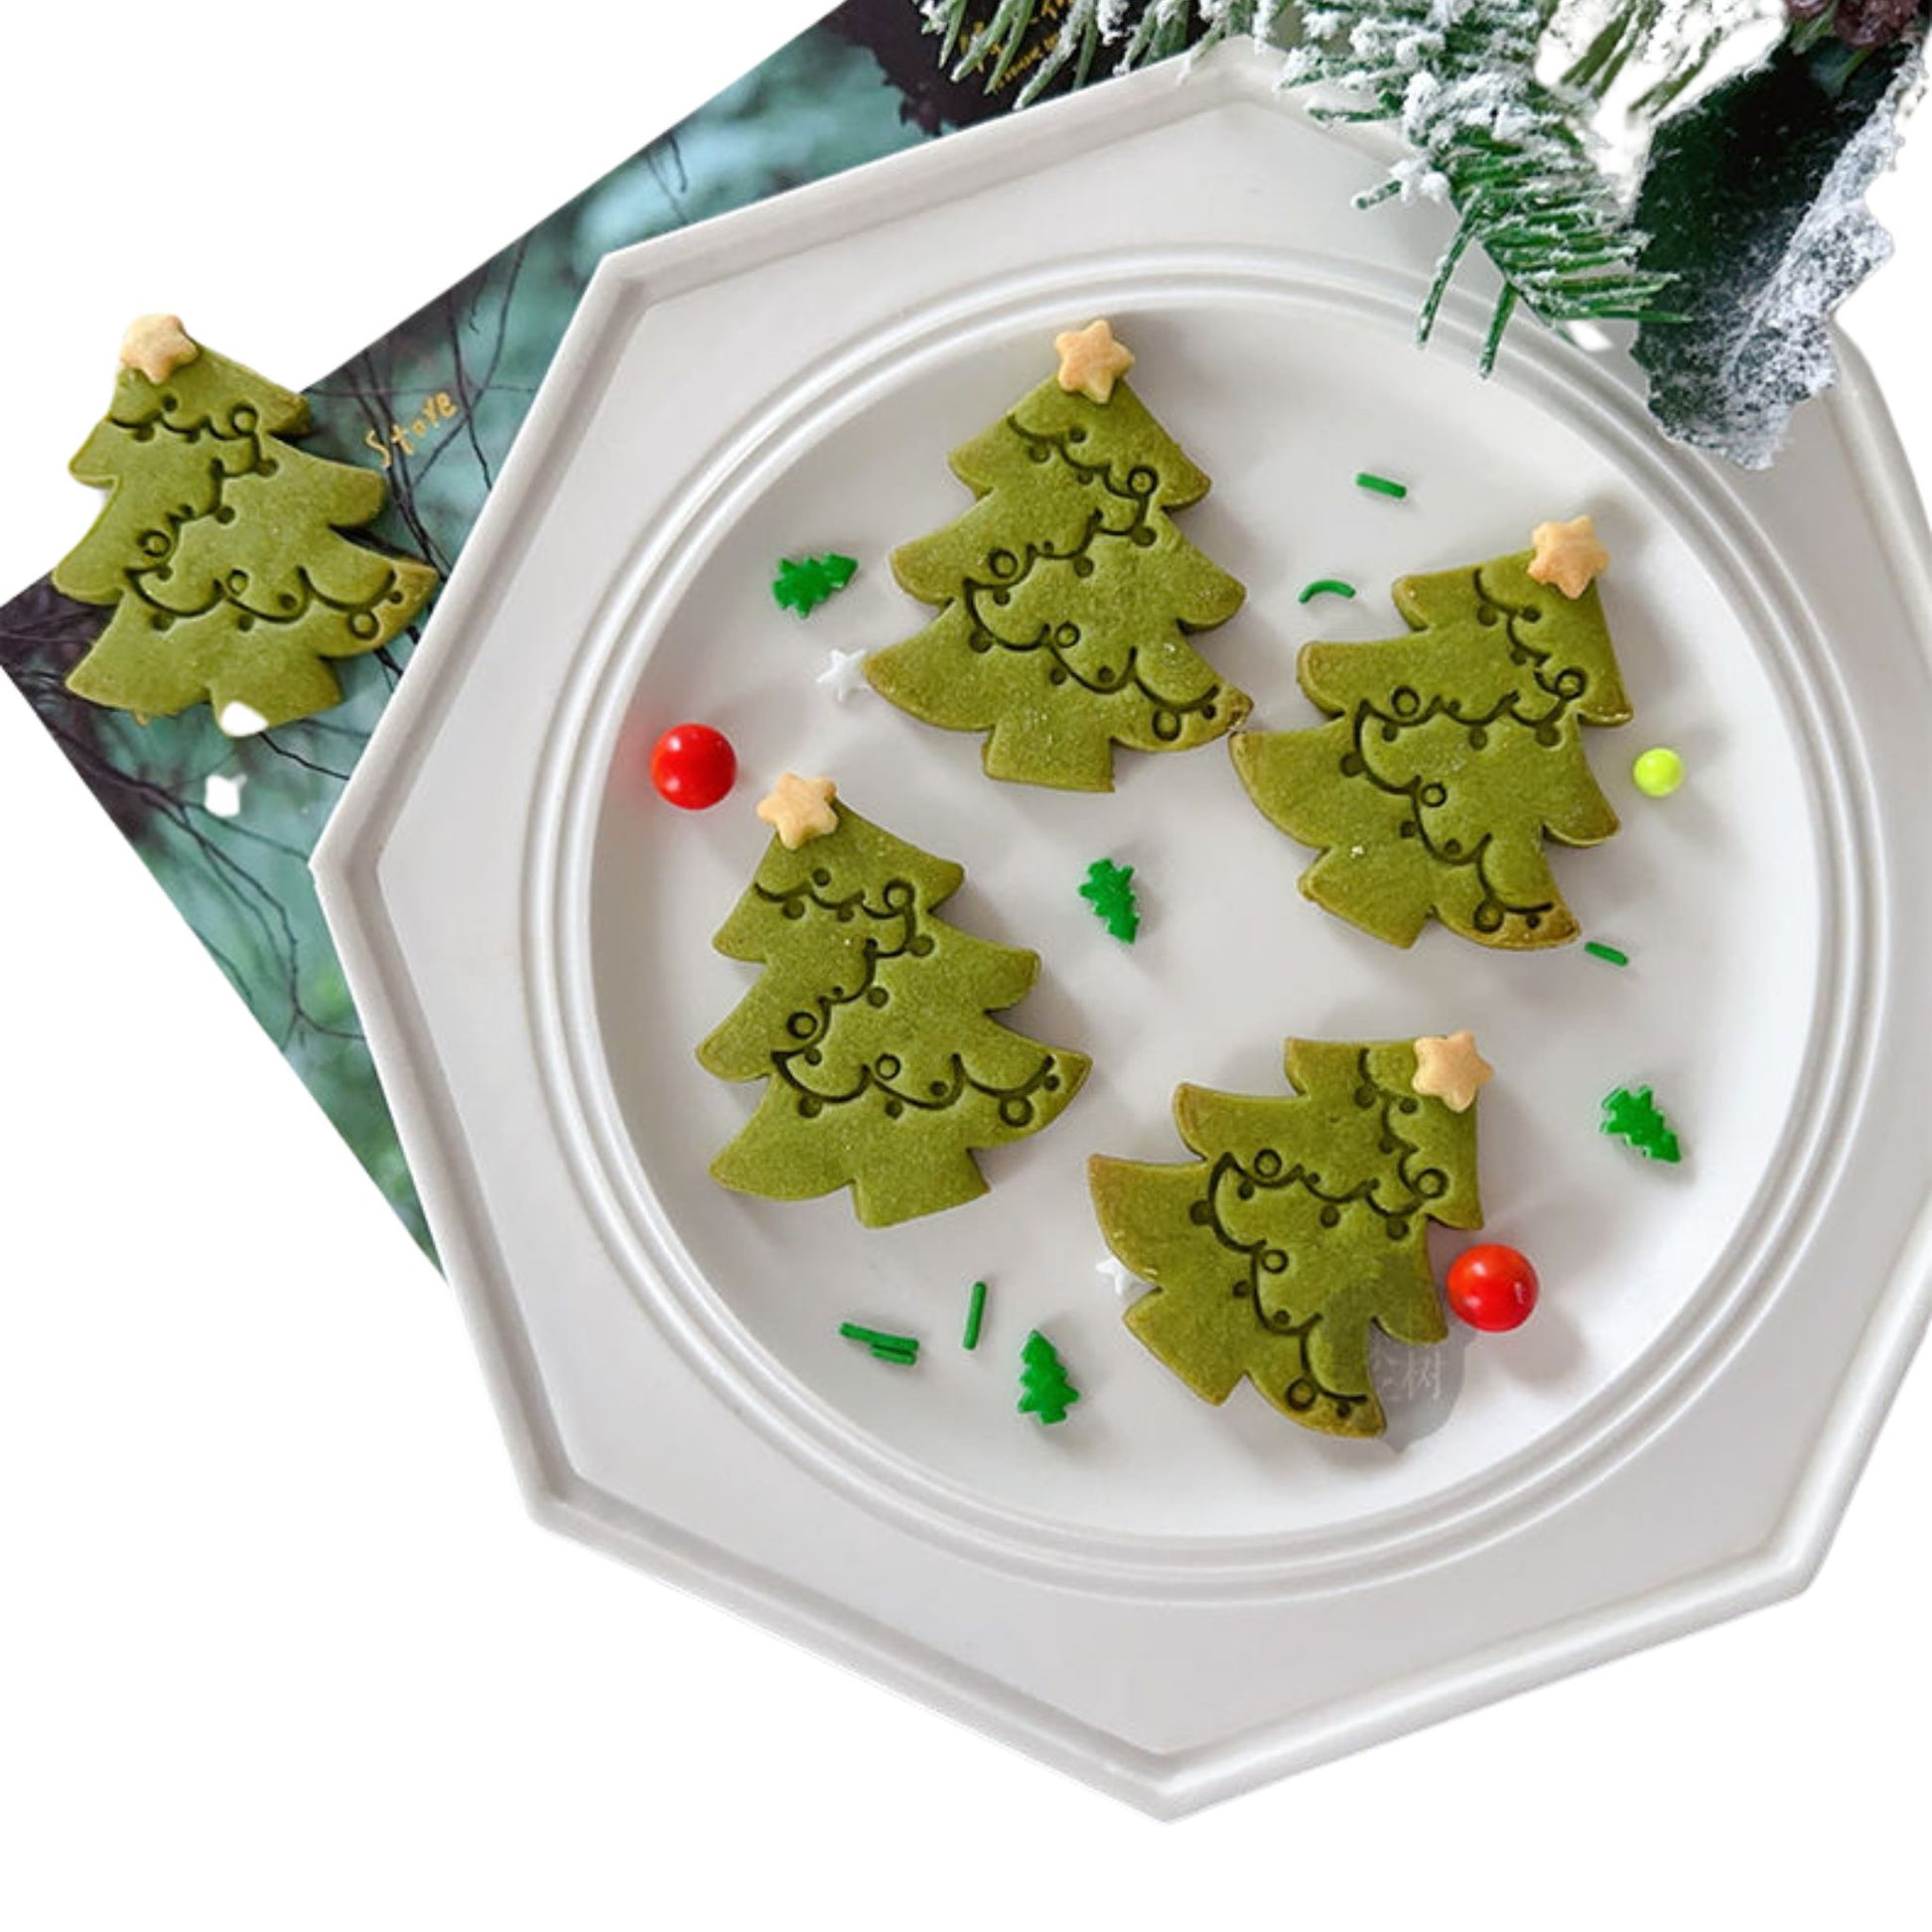 Premium Photo  Christmas baking. fir trees with decoration, flour, spices  and cookies molds on a cutting board. beautiful cookies with decor on green  surface